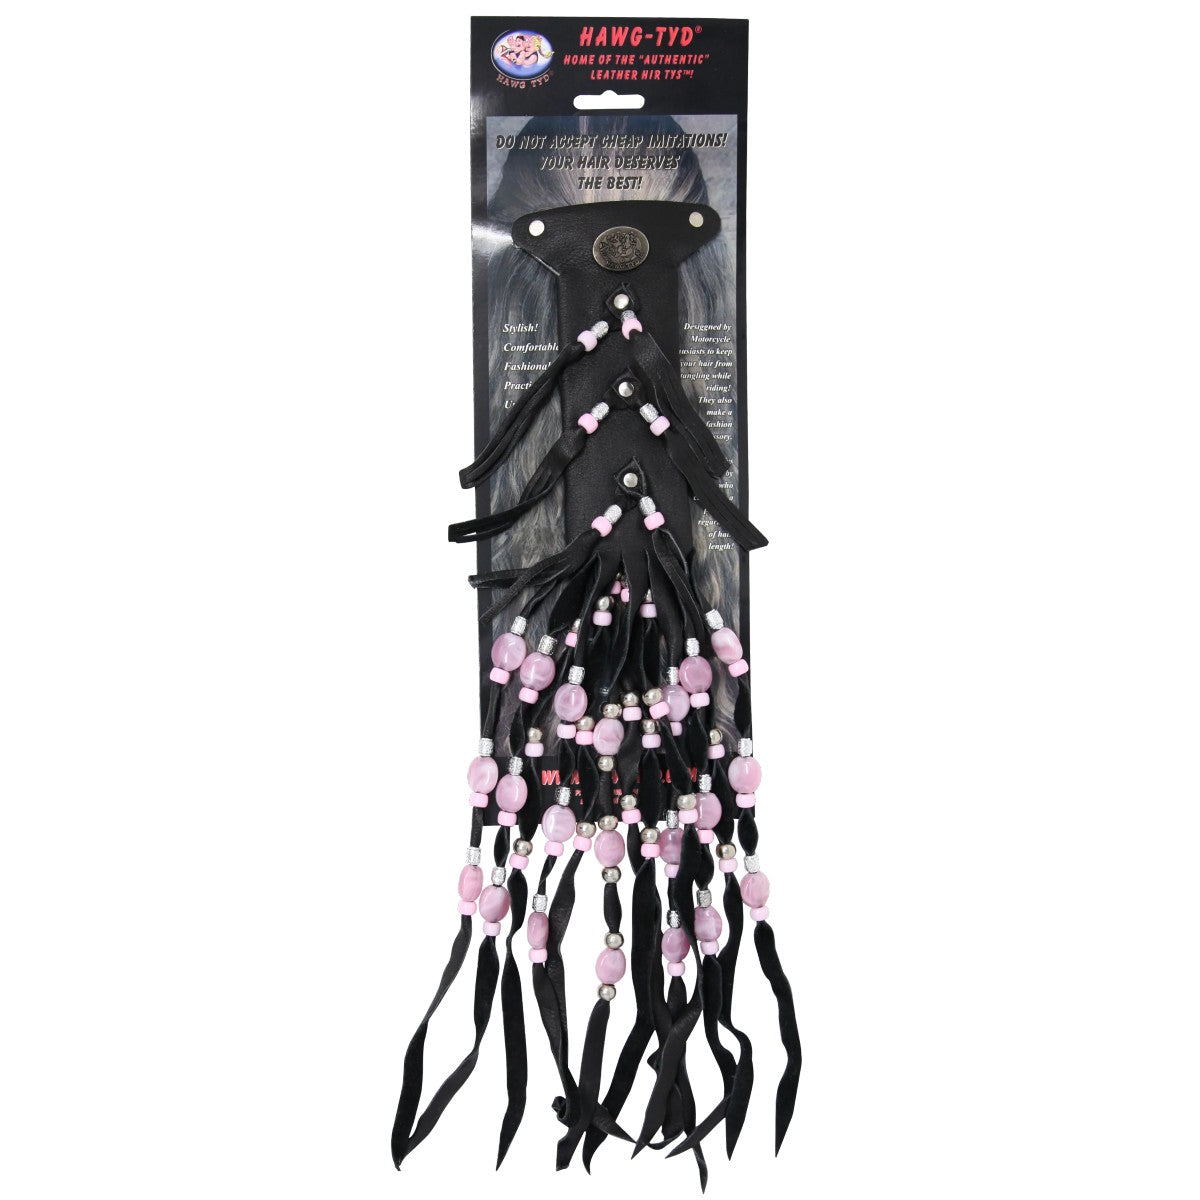 HTPink "Hawg Tyd" The Authentic Leather Hair TYS - Pink Beads